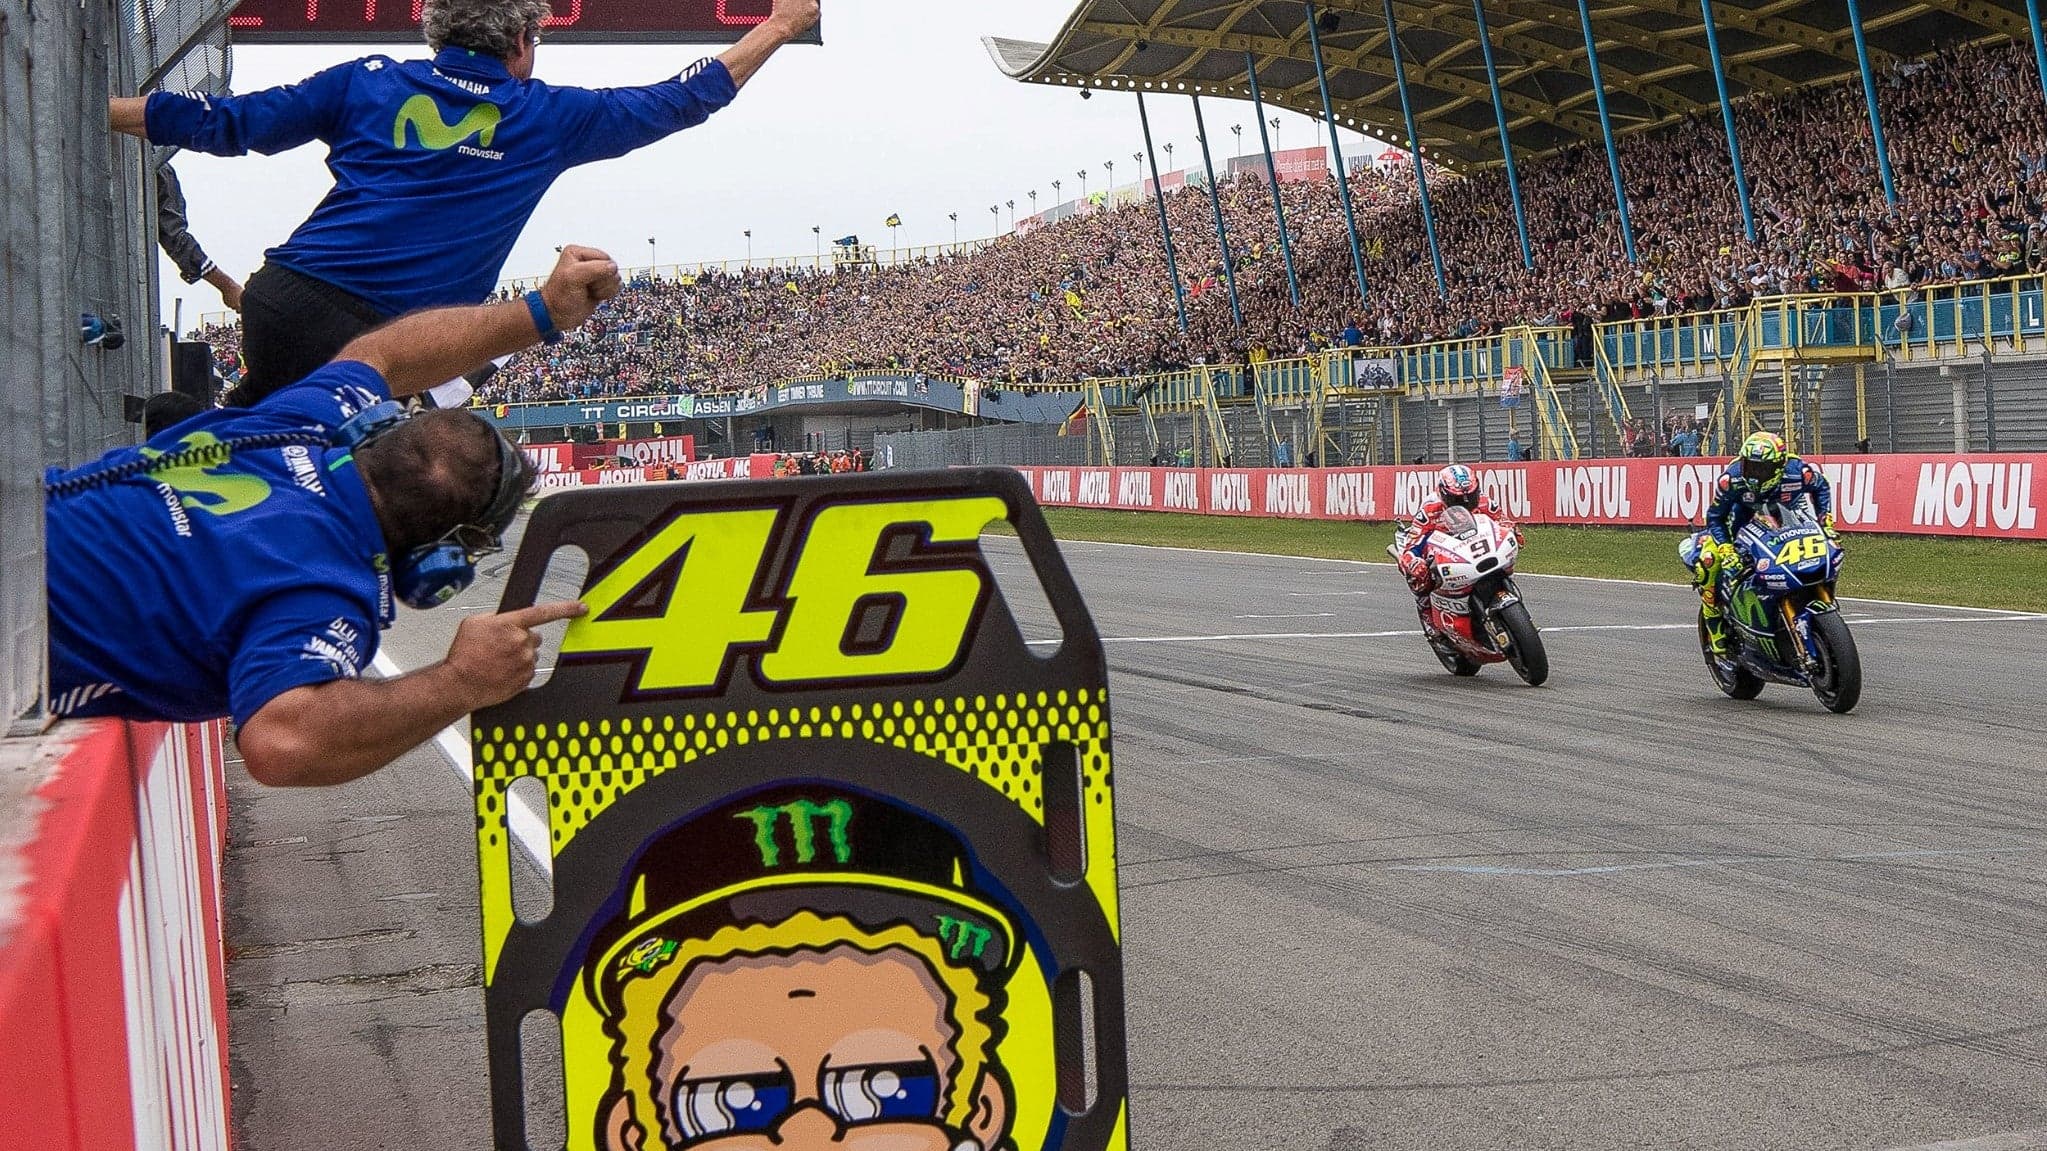 Former MotoGP Champion Valentino Rossi Finally Wins a Race After Year-Long Drought